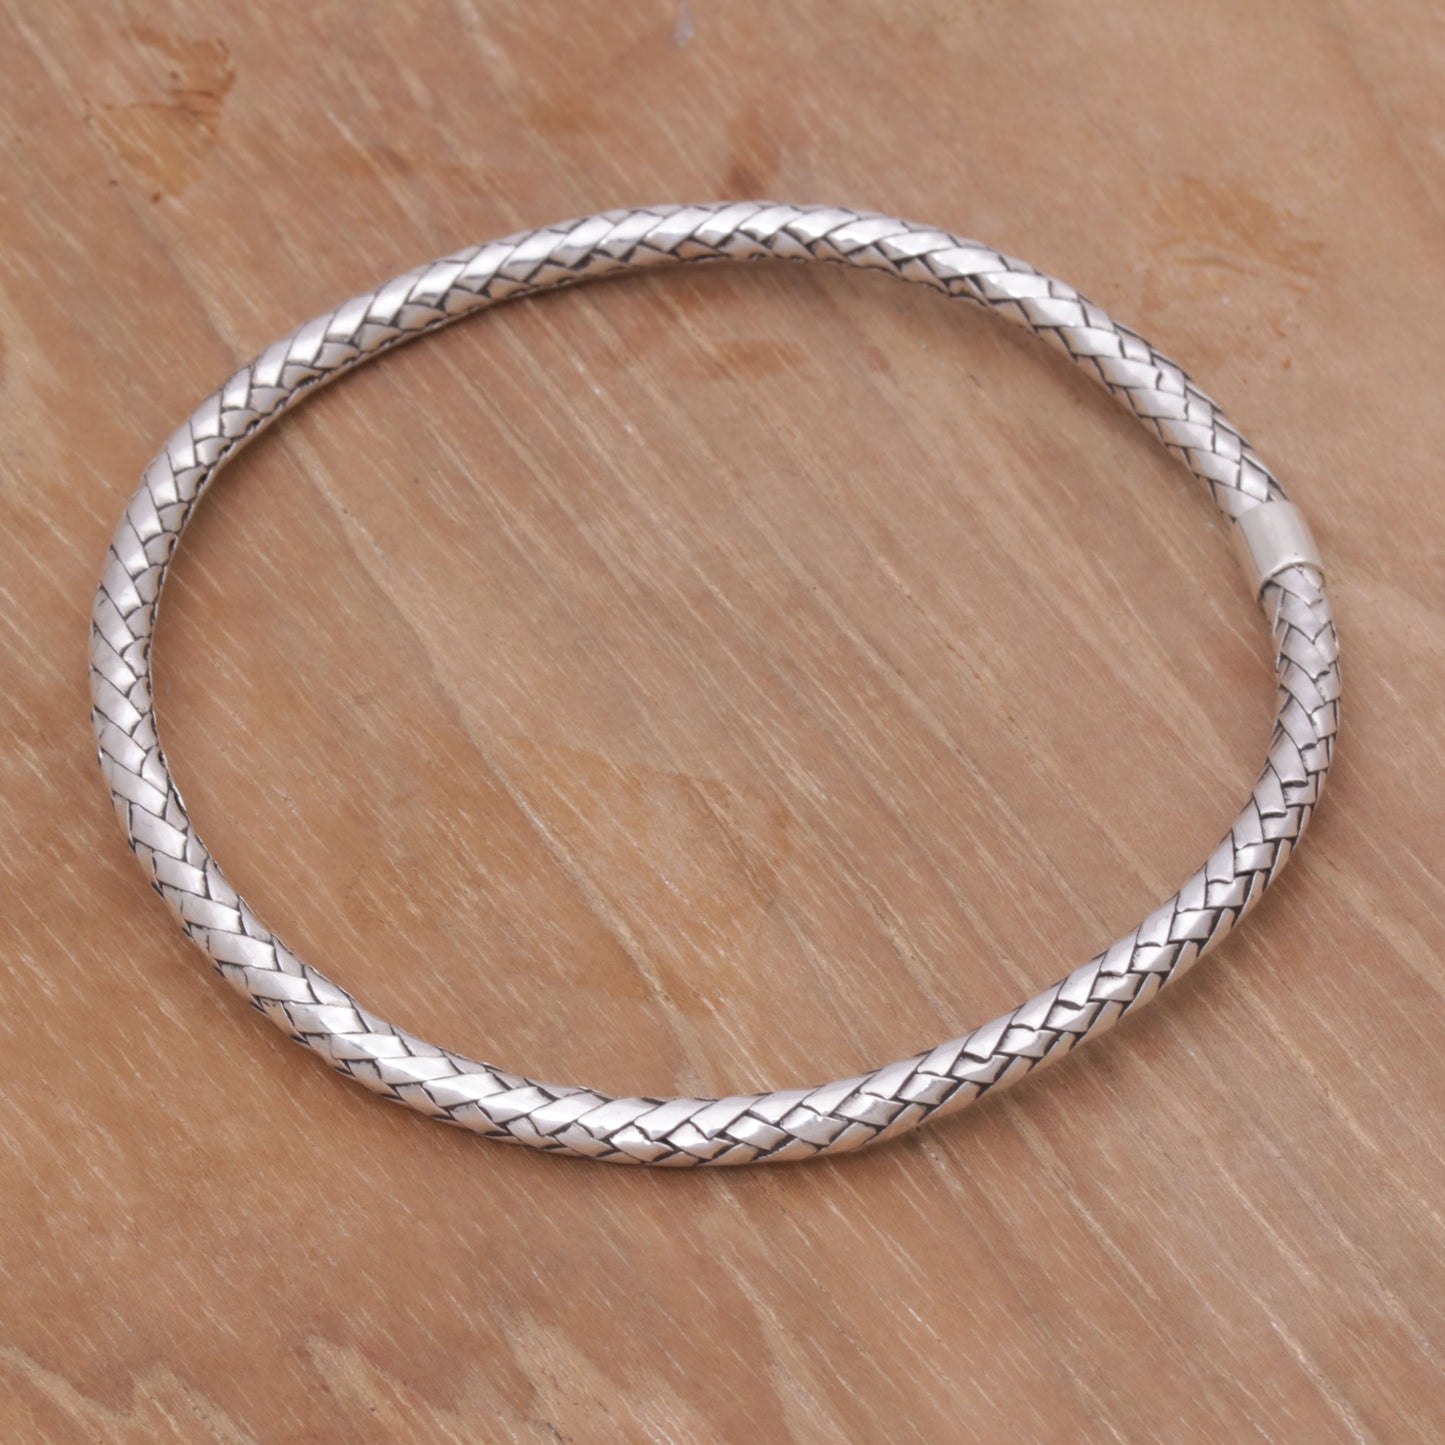 Simple Perfection Handmade Sterling Silver Bangle Bracelet from Indonesia